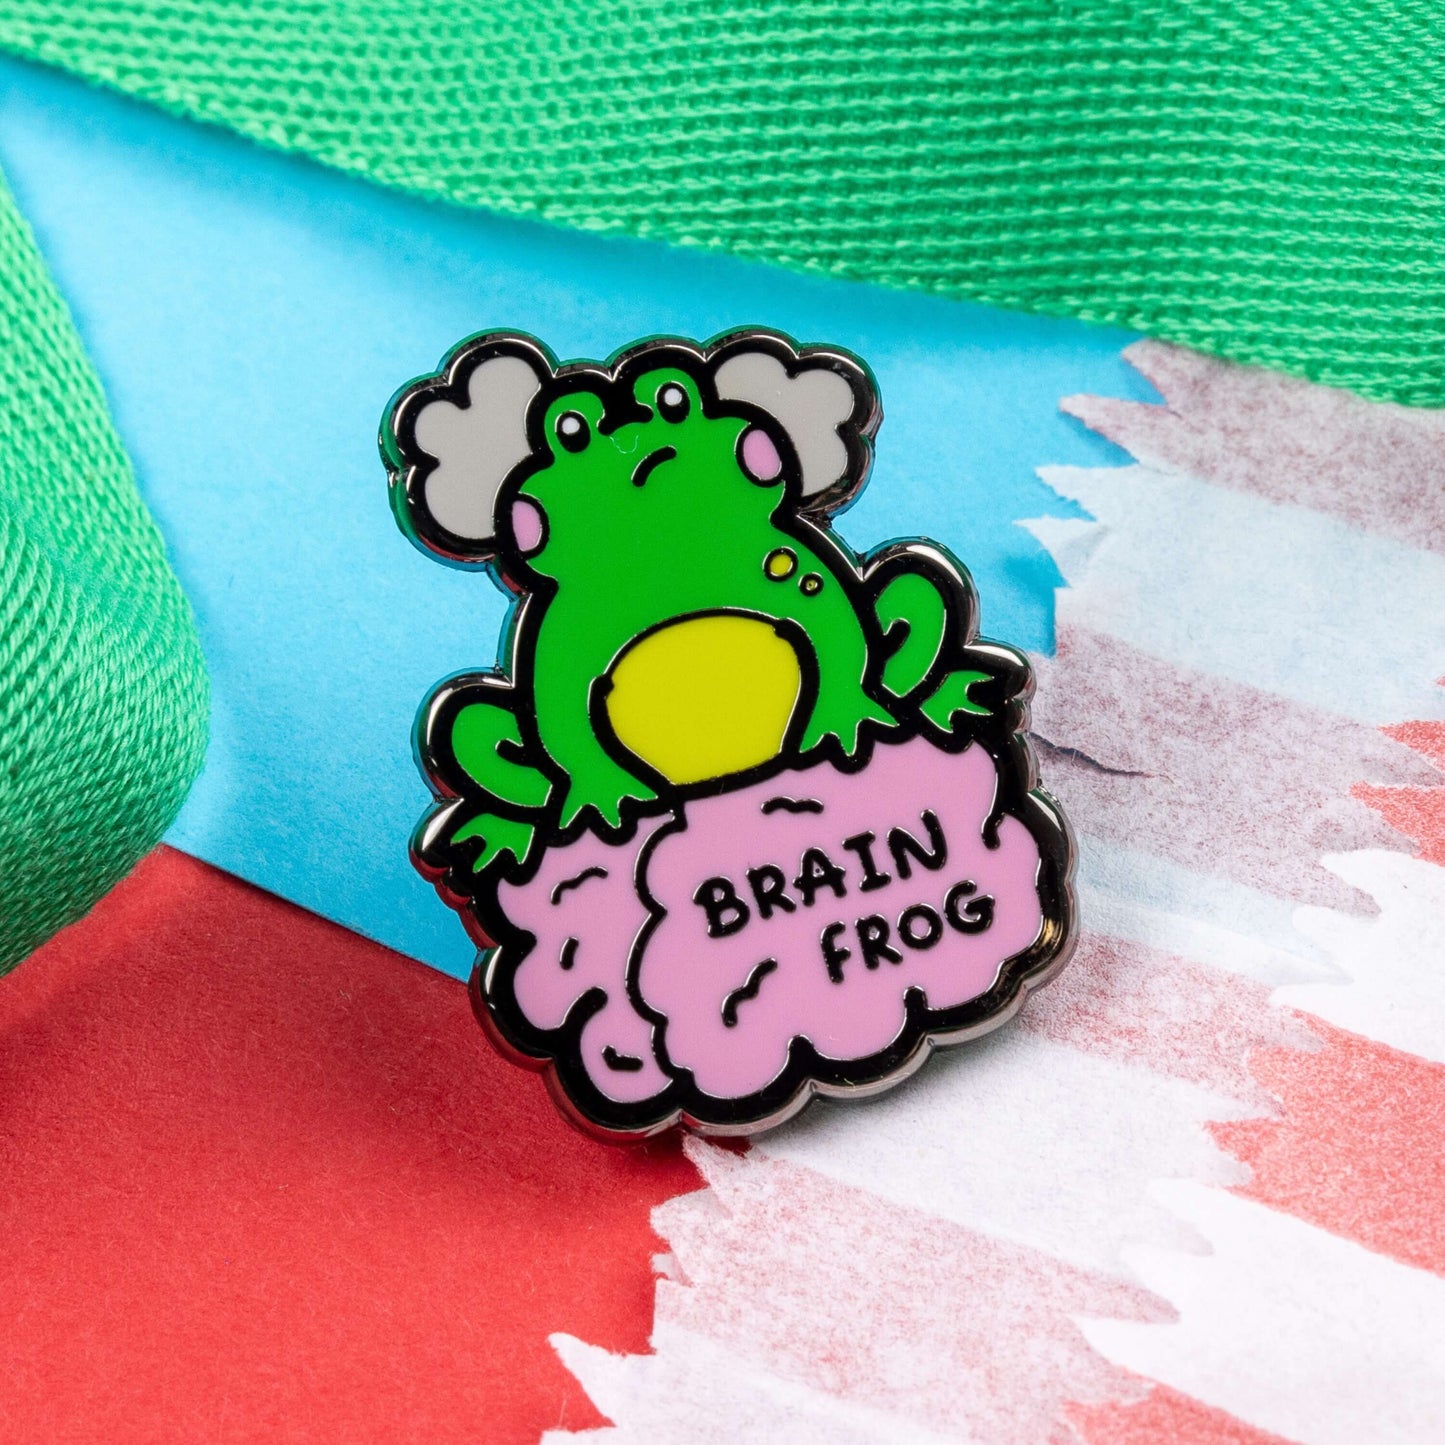 The Brain Frog Enamel Pin - Brain Fog on a blue and red card background with a green ribbon. The pin is of a green frog with pink blush cheeks looking confused with two grey clouds by its head, it is sat on a pink brain with the text reading Brain Frog. The design is raising awareness for brain fog.